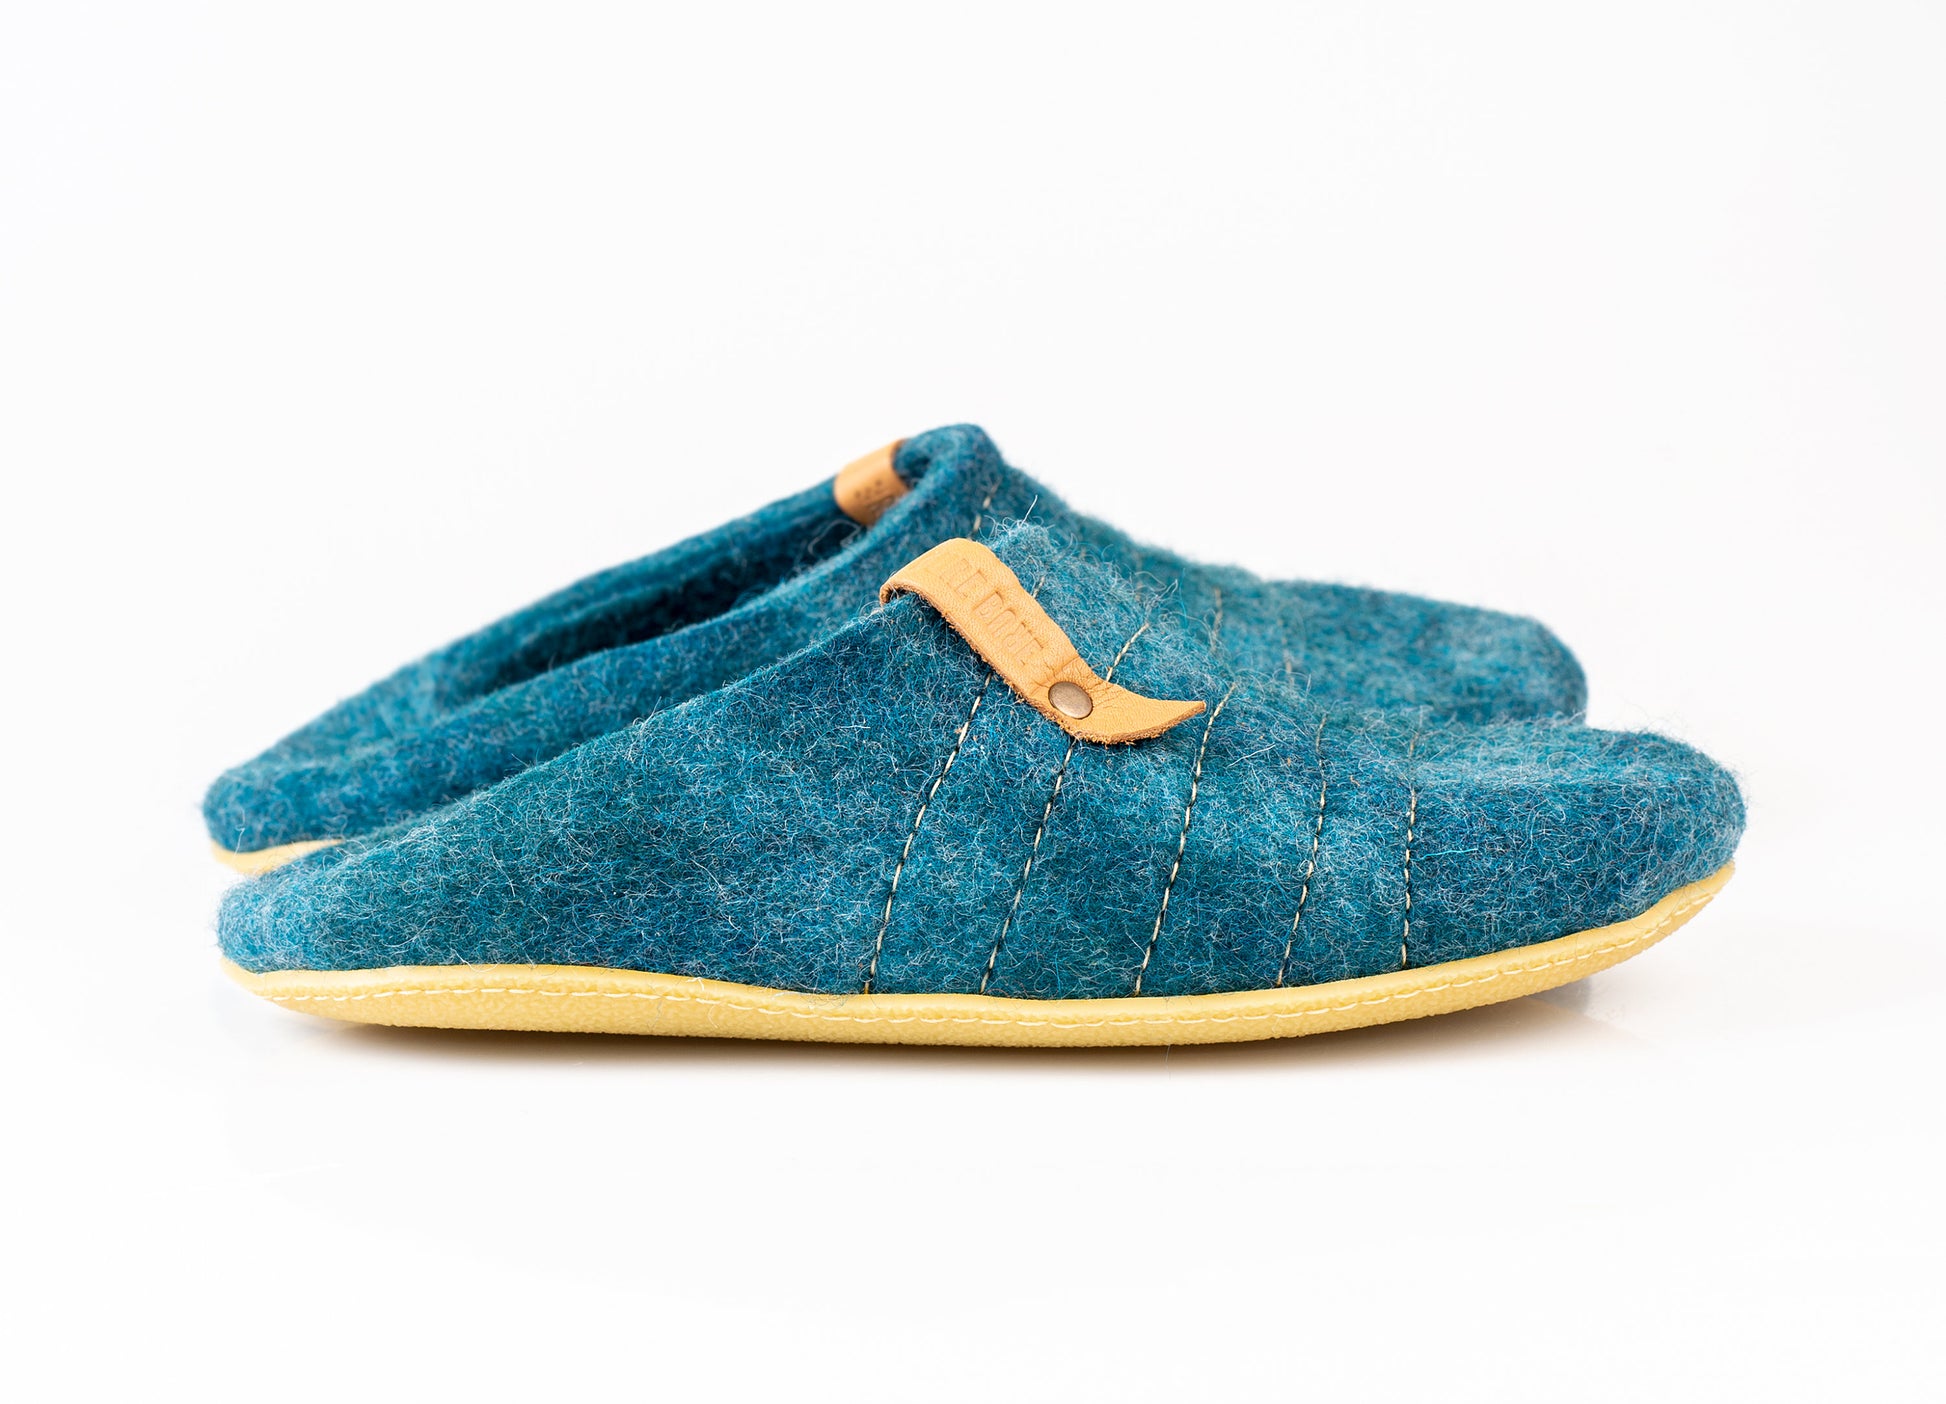 Mens natural wool slippers with collapsible back and sturdy stitching